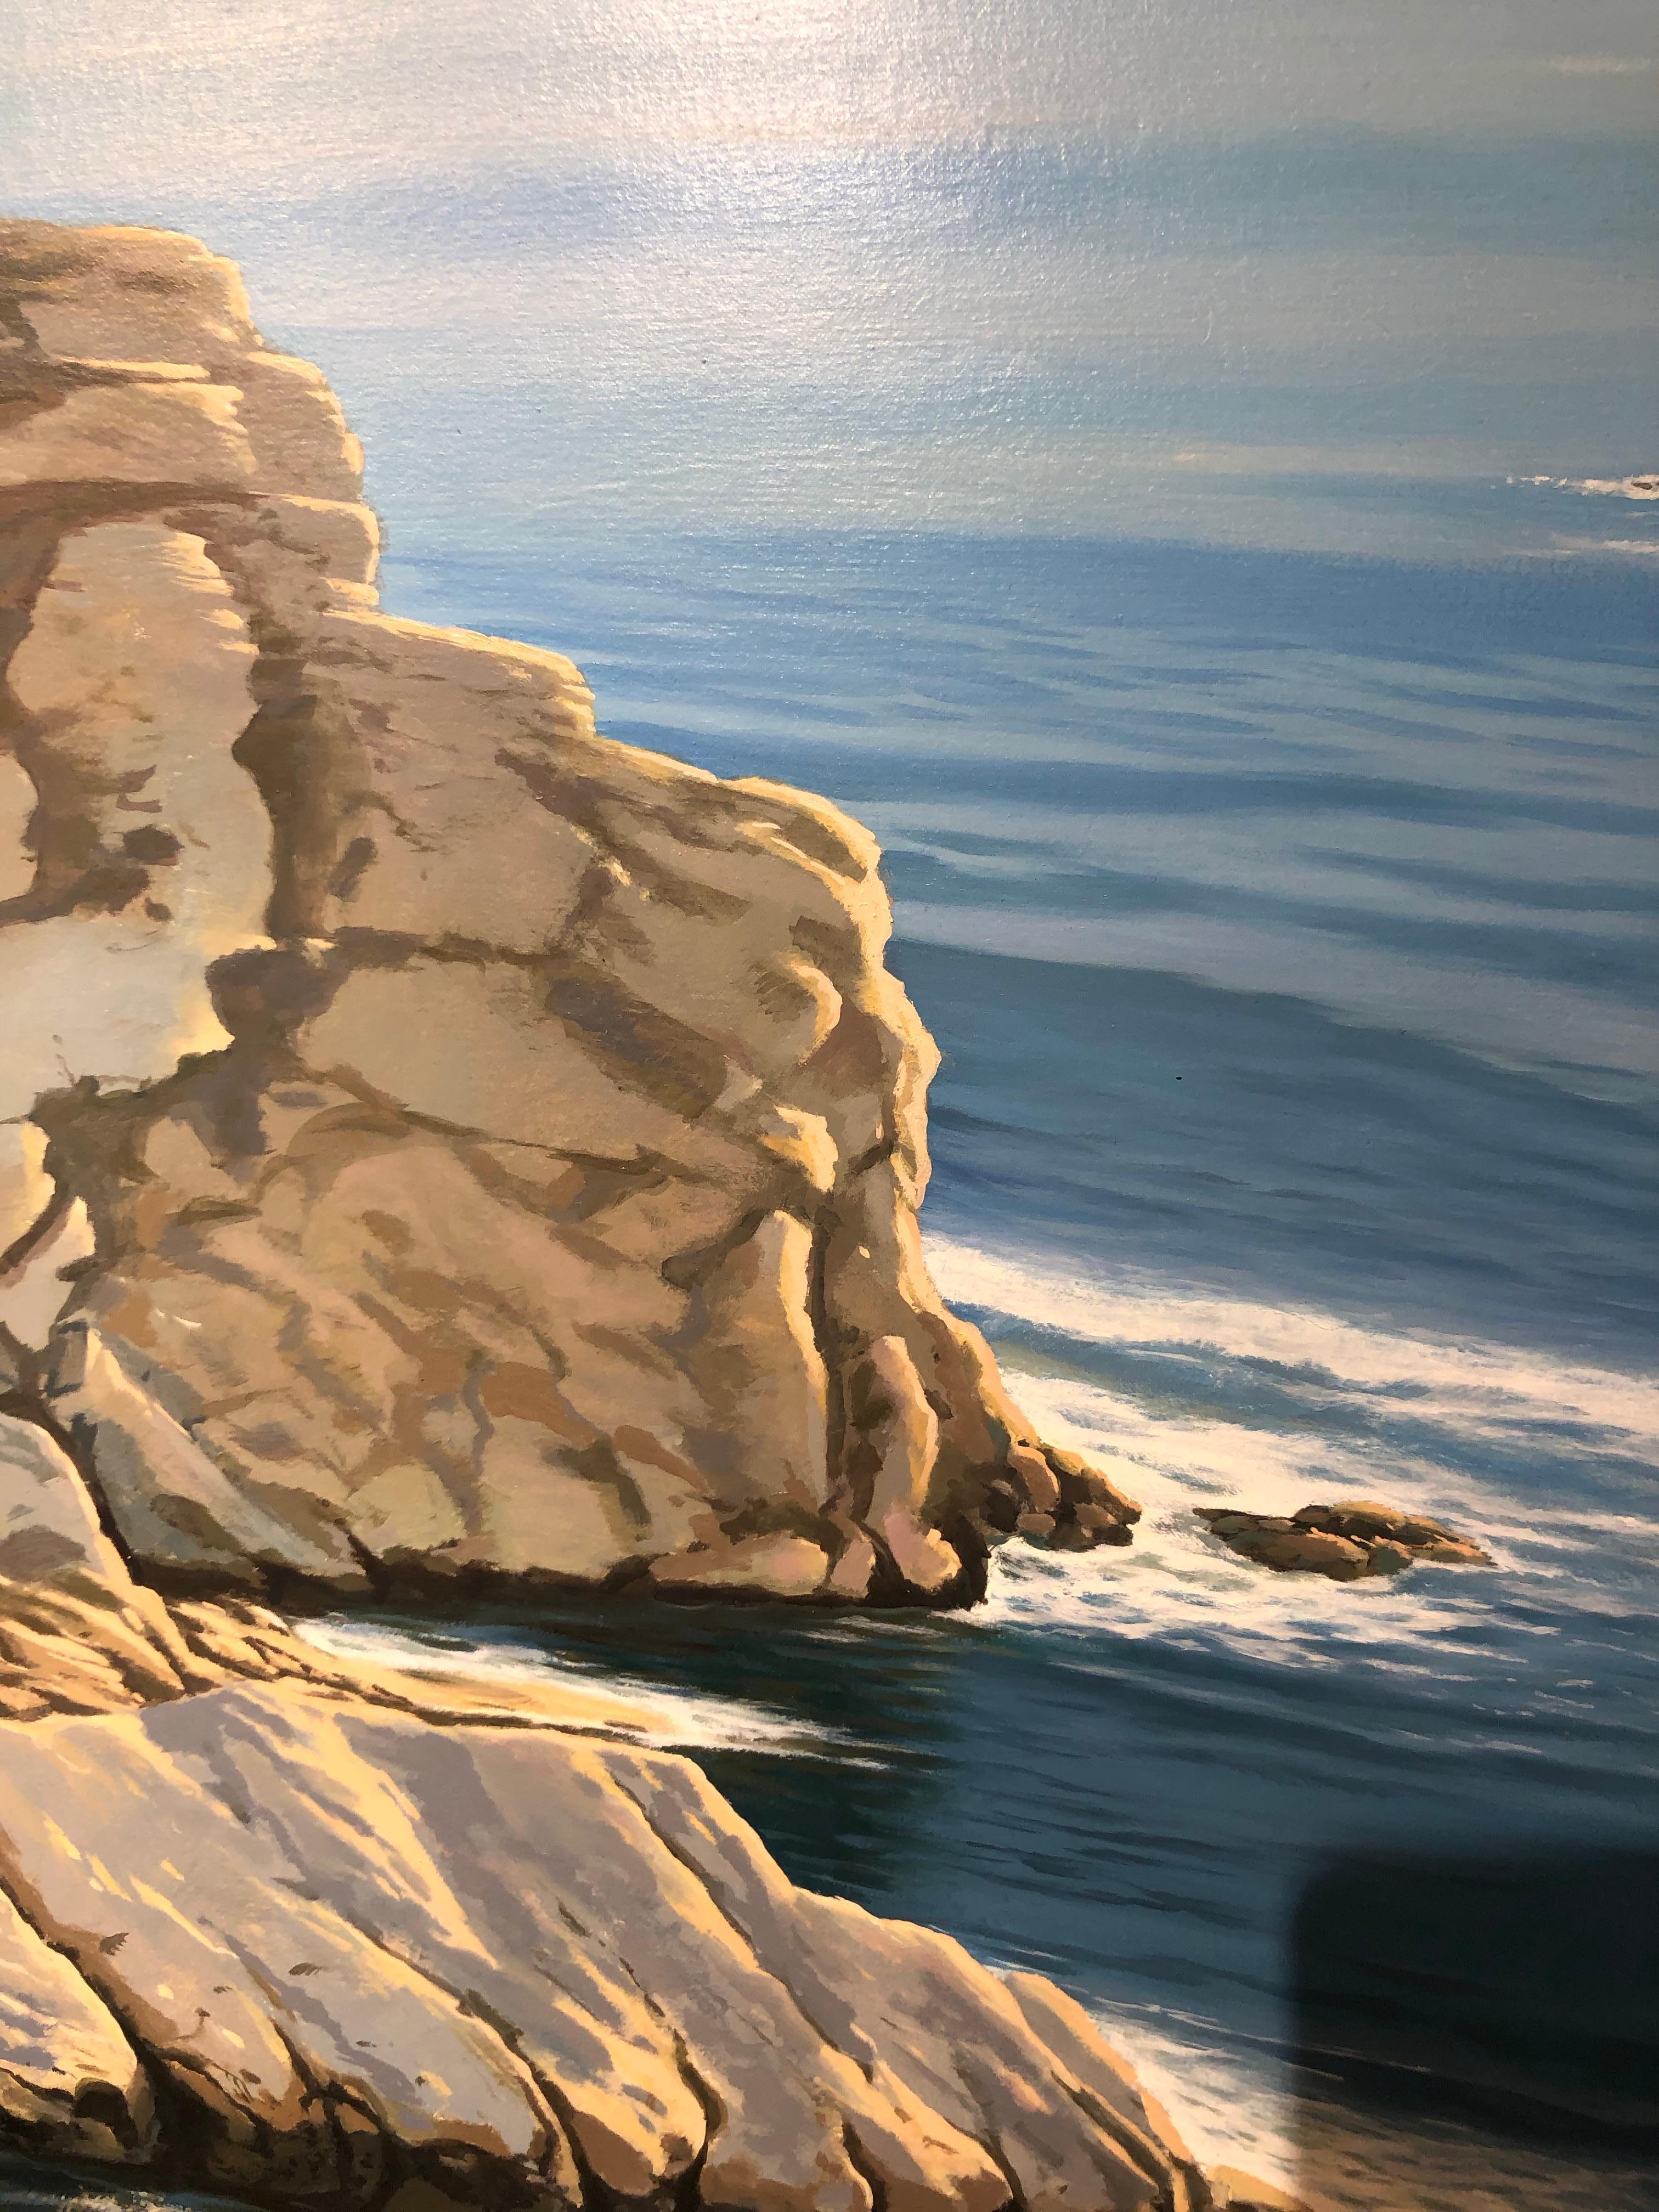 Evocation - Ocean Cliffside Scene Bathed in Warm Light and Blue Turquoise Water 1